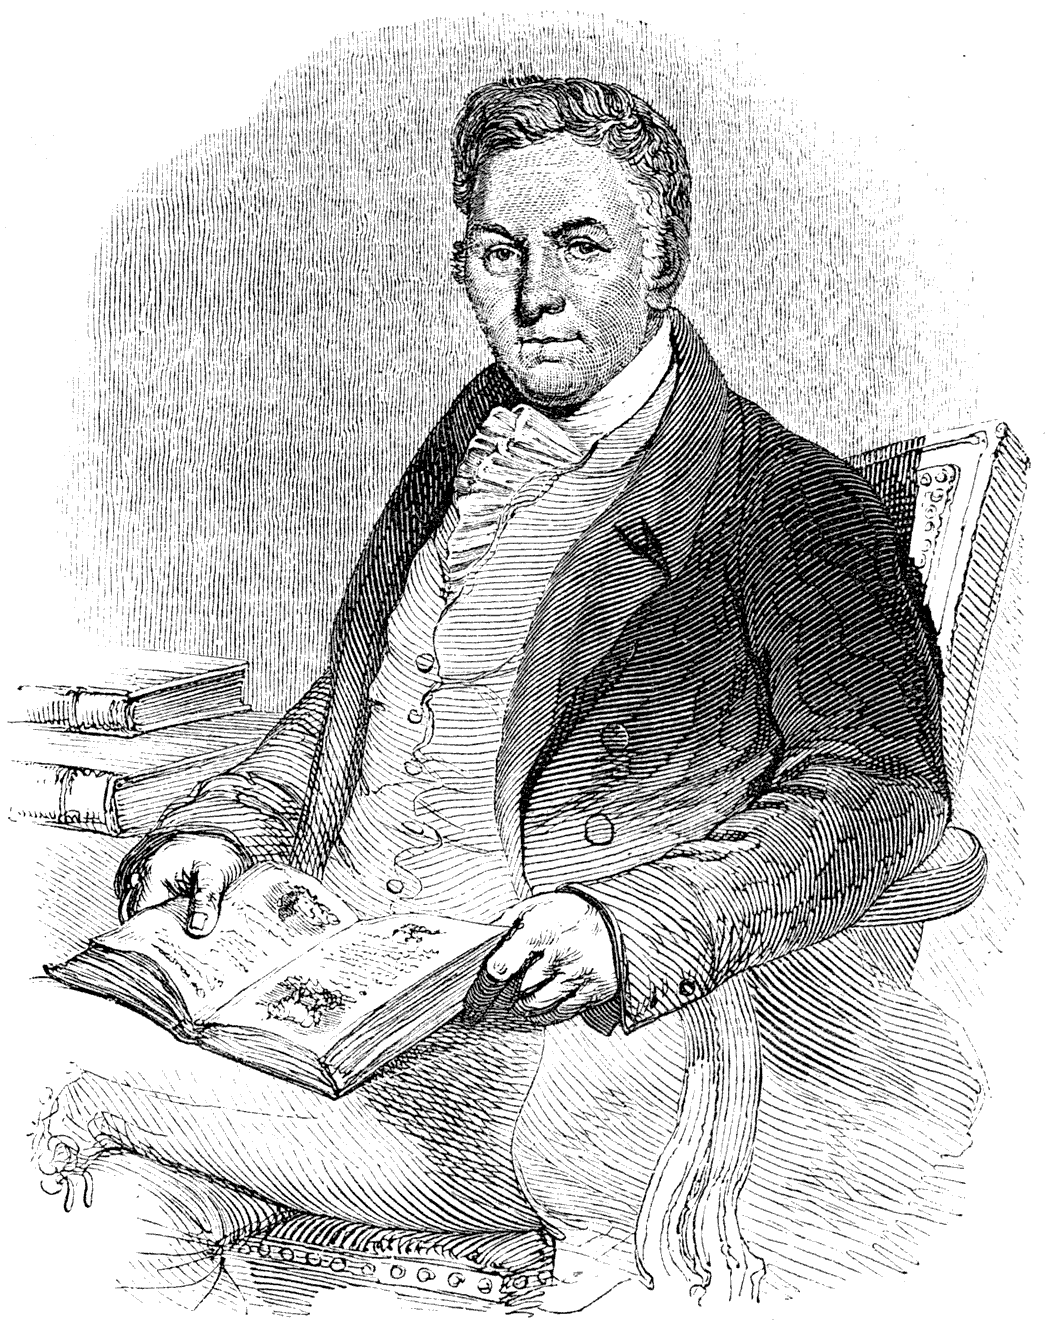 Portrait of Thomas Bewick, 1753-1828, English woodcut engraver. From Henri Bouchot 'The Printed Book' 1887, page 214, published size in Bouchot 8.5 cm wide by 11 cm high.